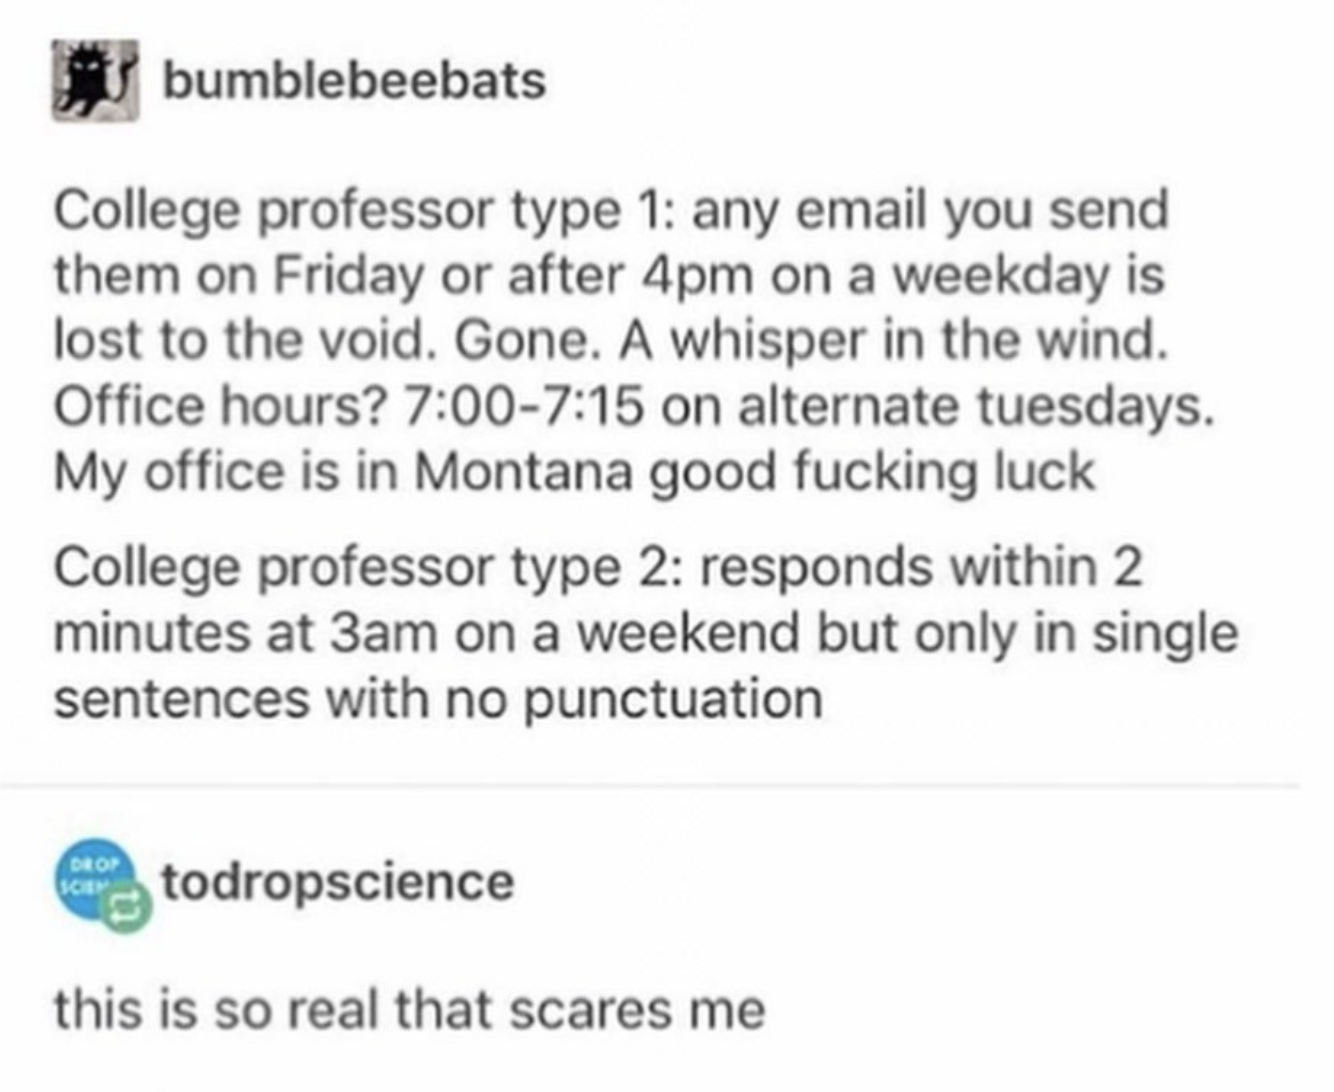 tumblr post about the two types of college professors, one who is strict and one who is not